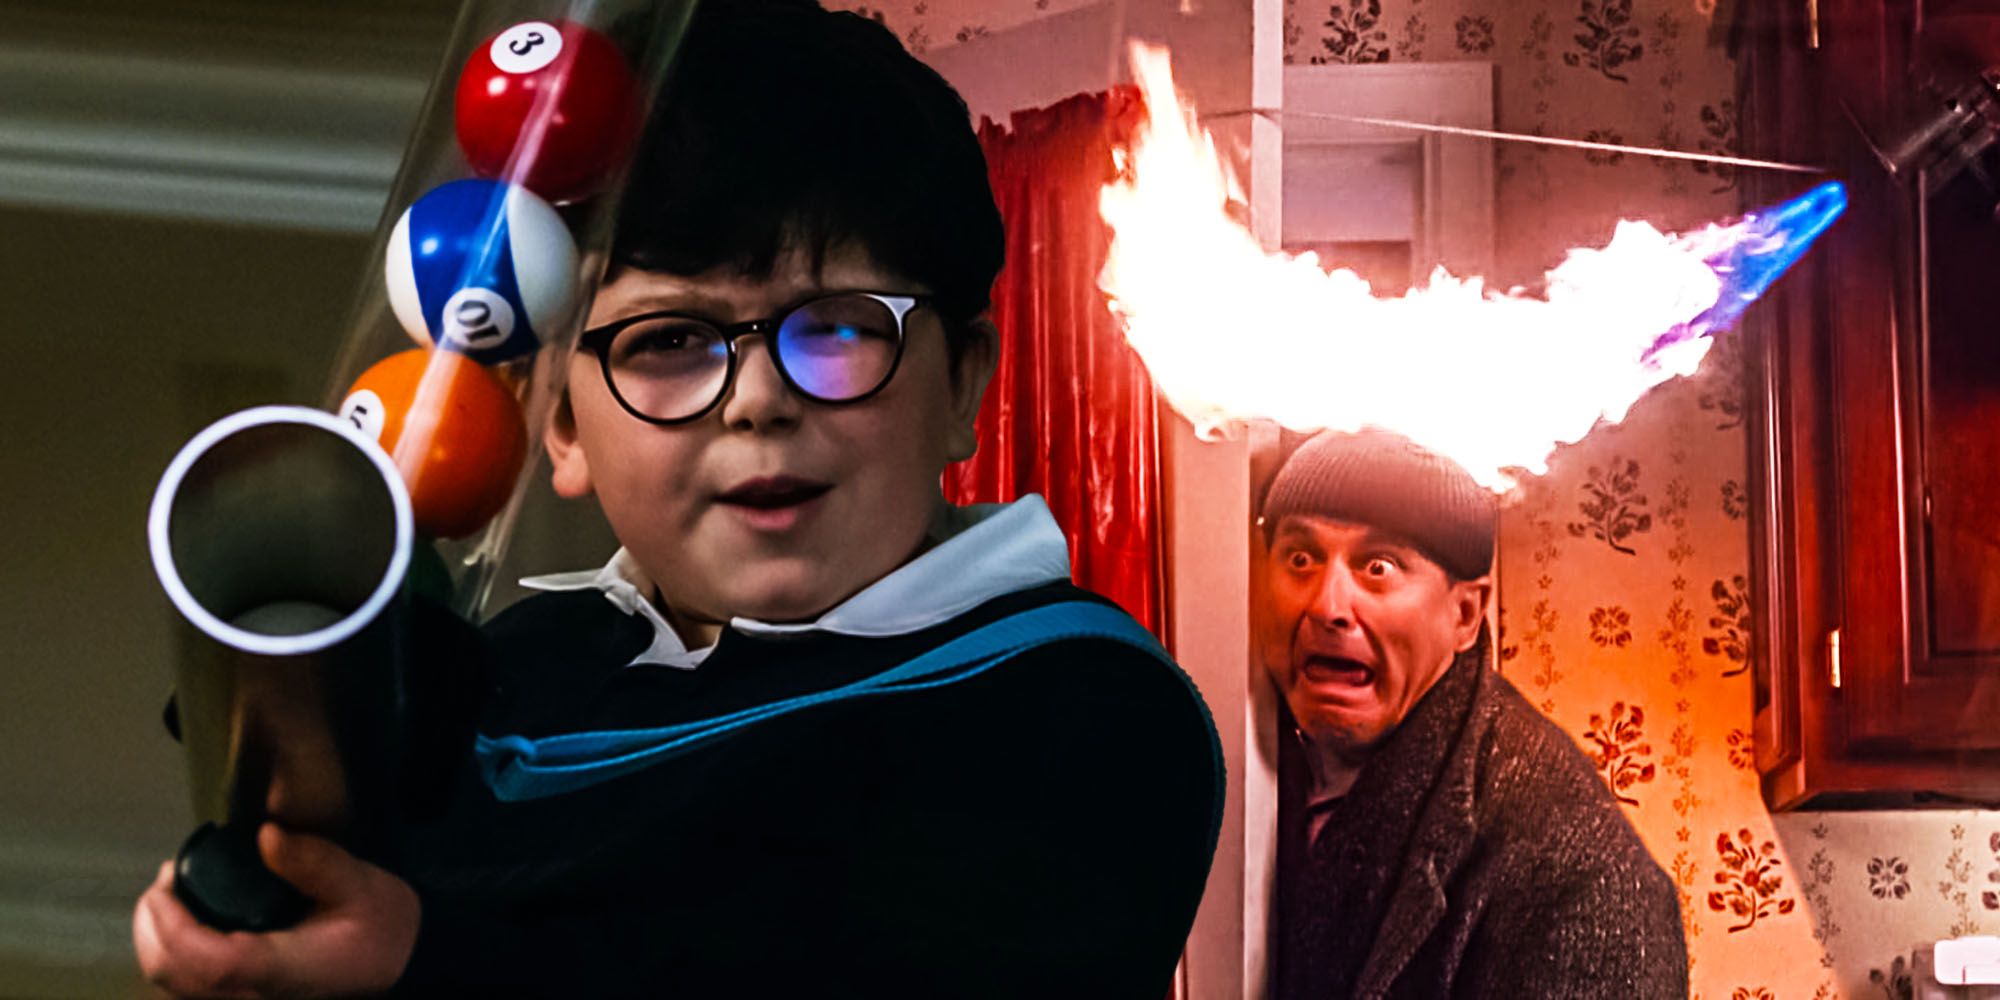 The Home Alone Reboot Has A Big Disney Problem To Overcome